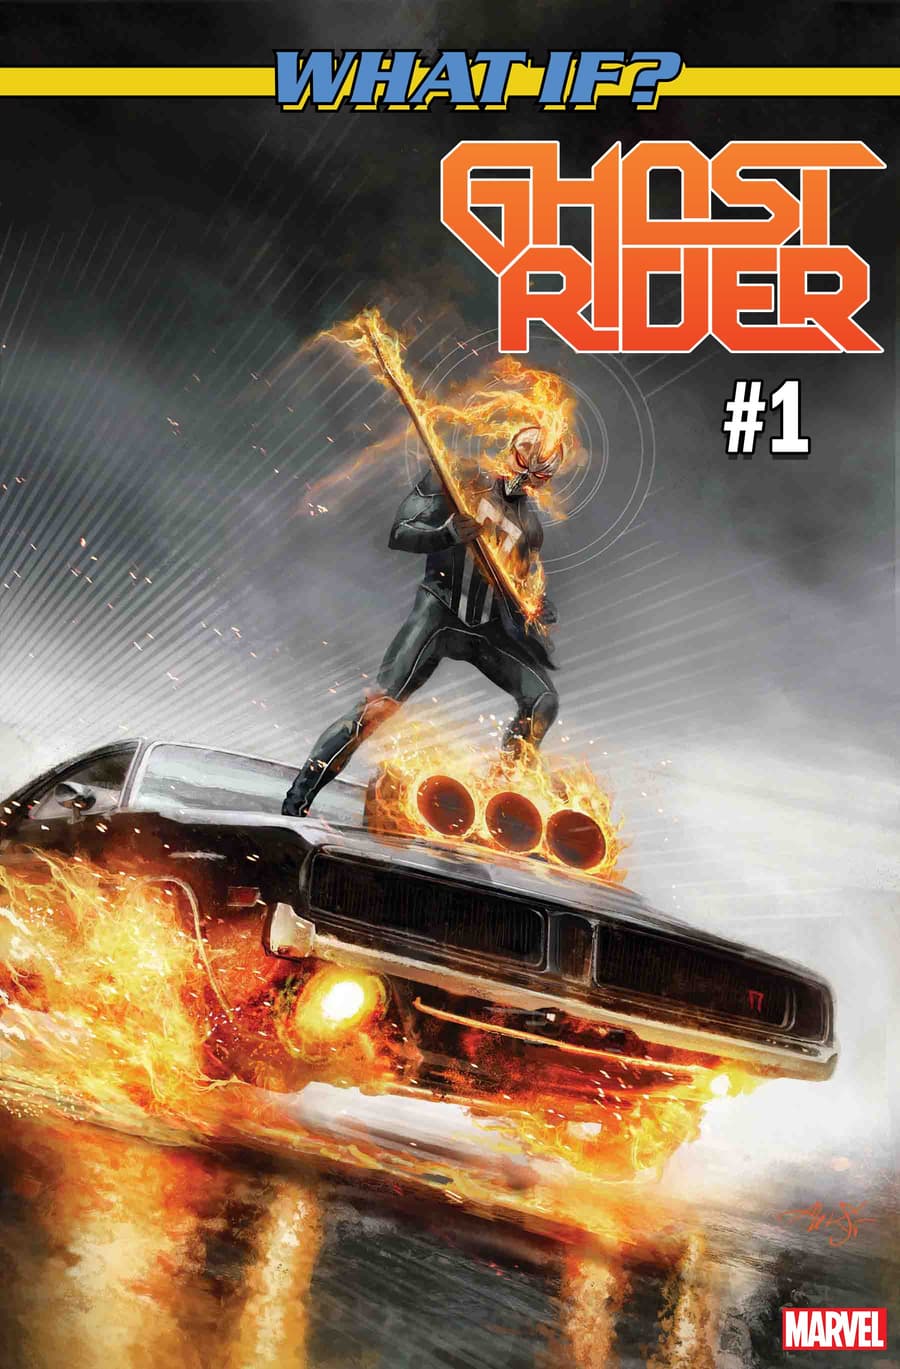 WHAT IF? GHOST RIDER #1